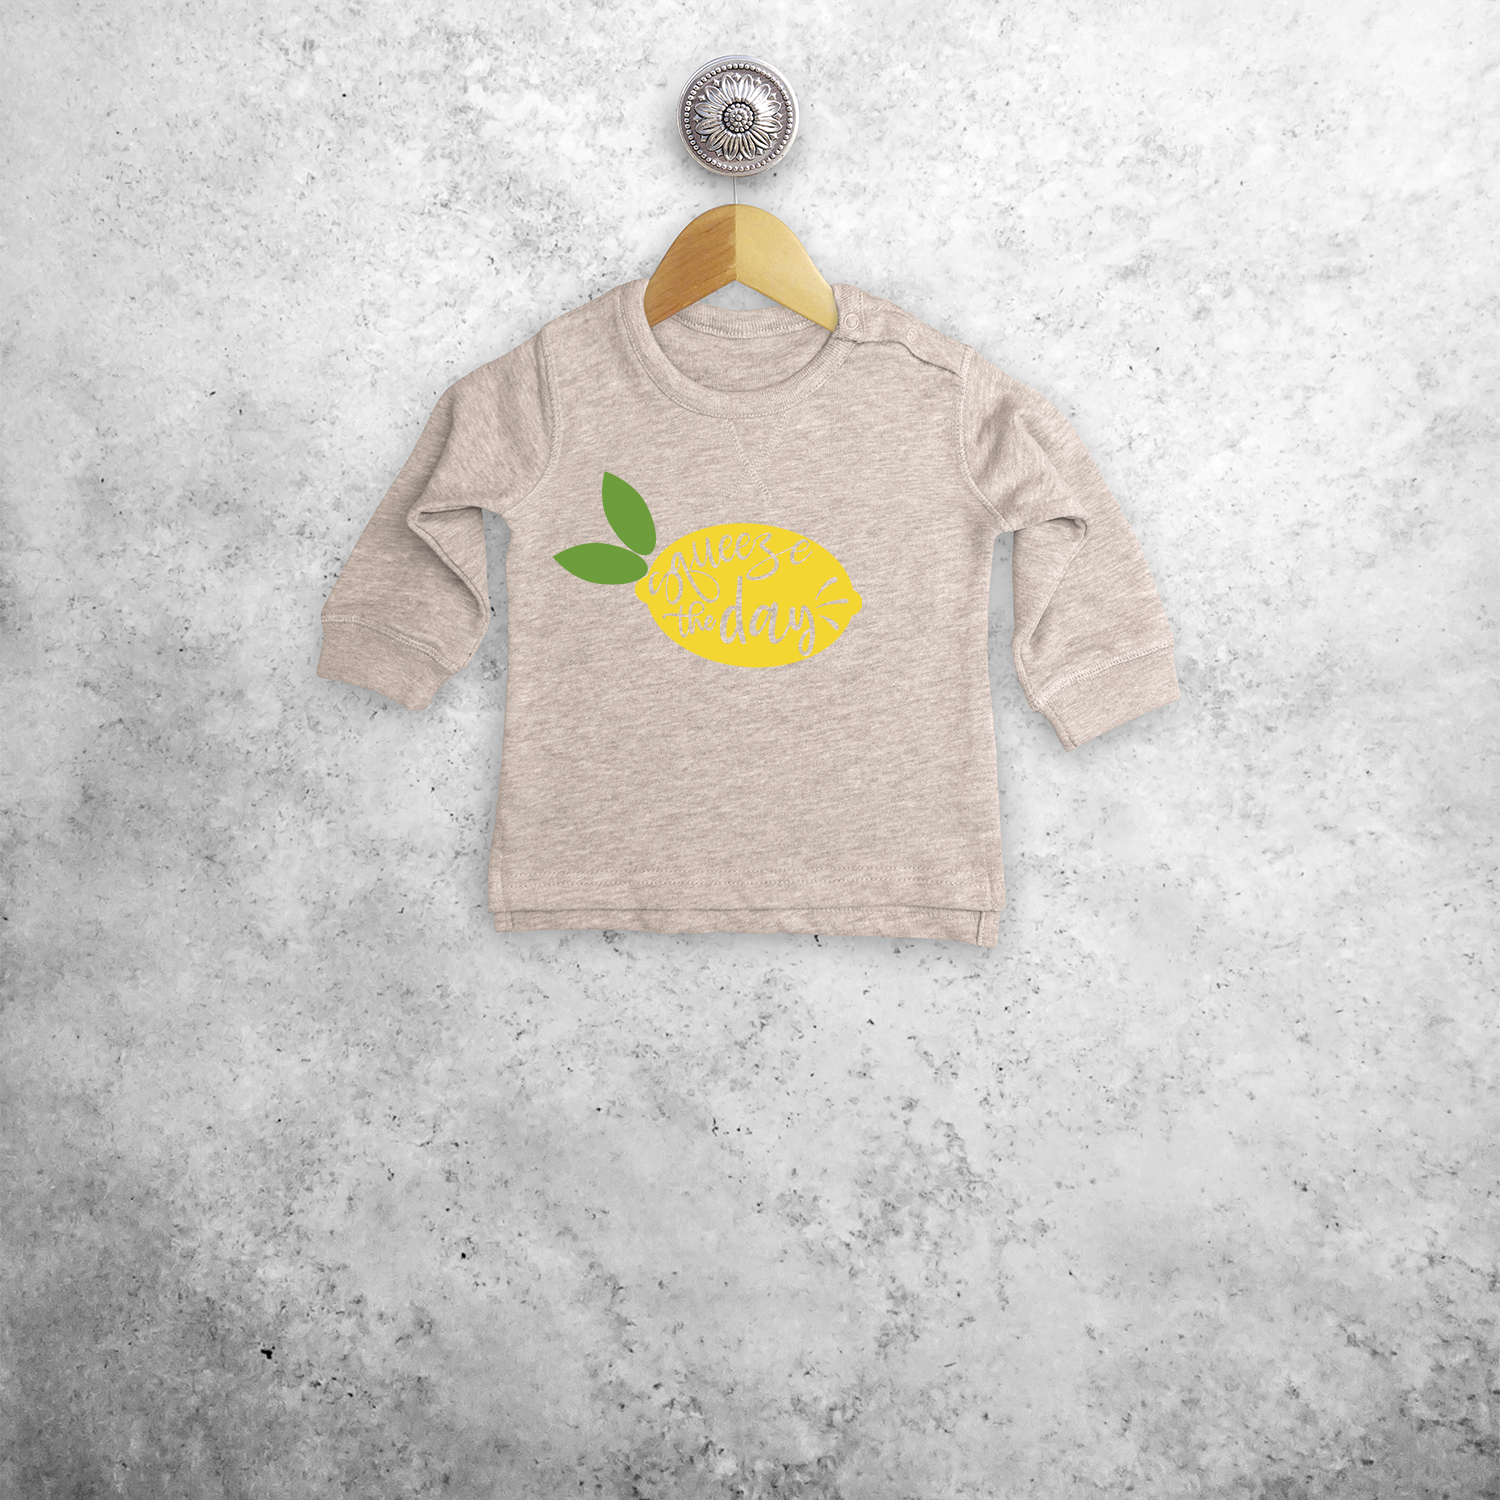 'Squeeze the day' baby sweater